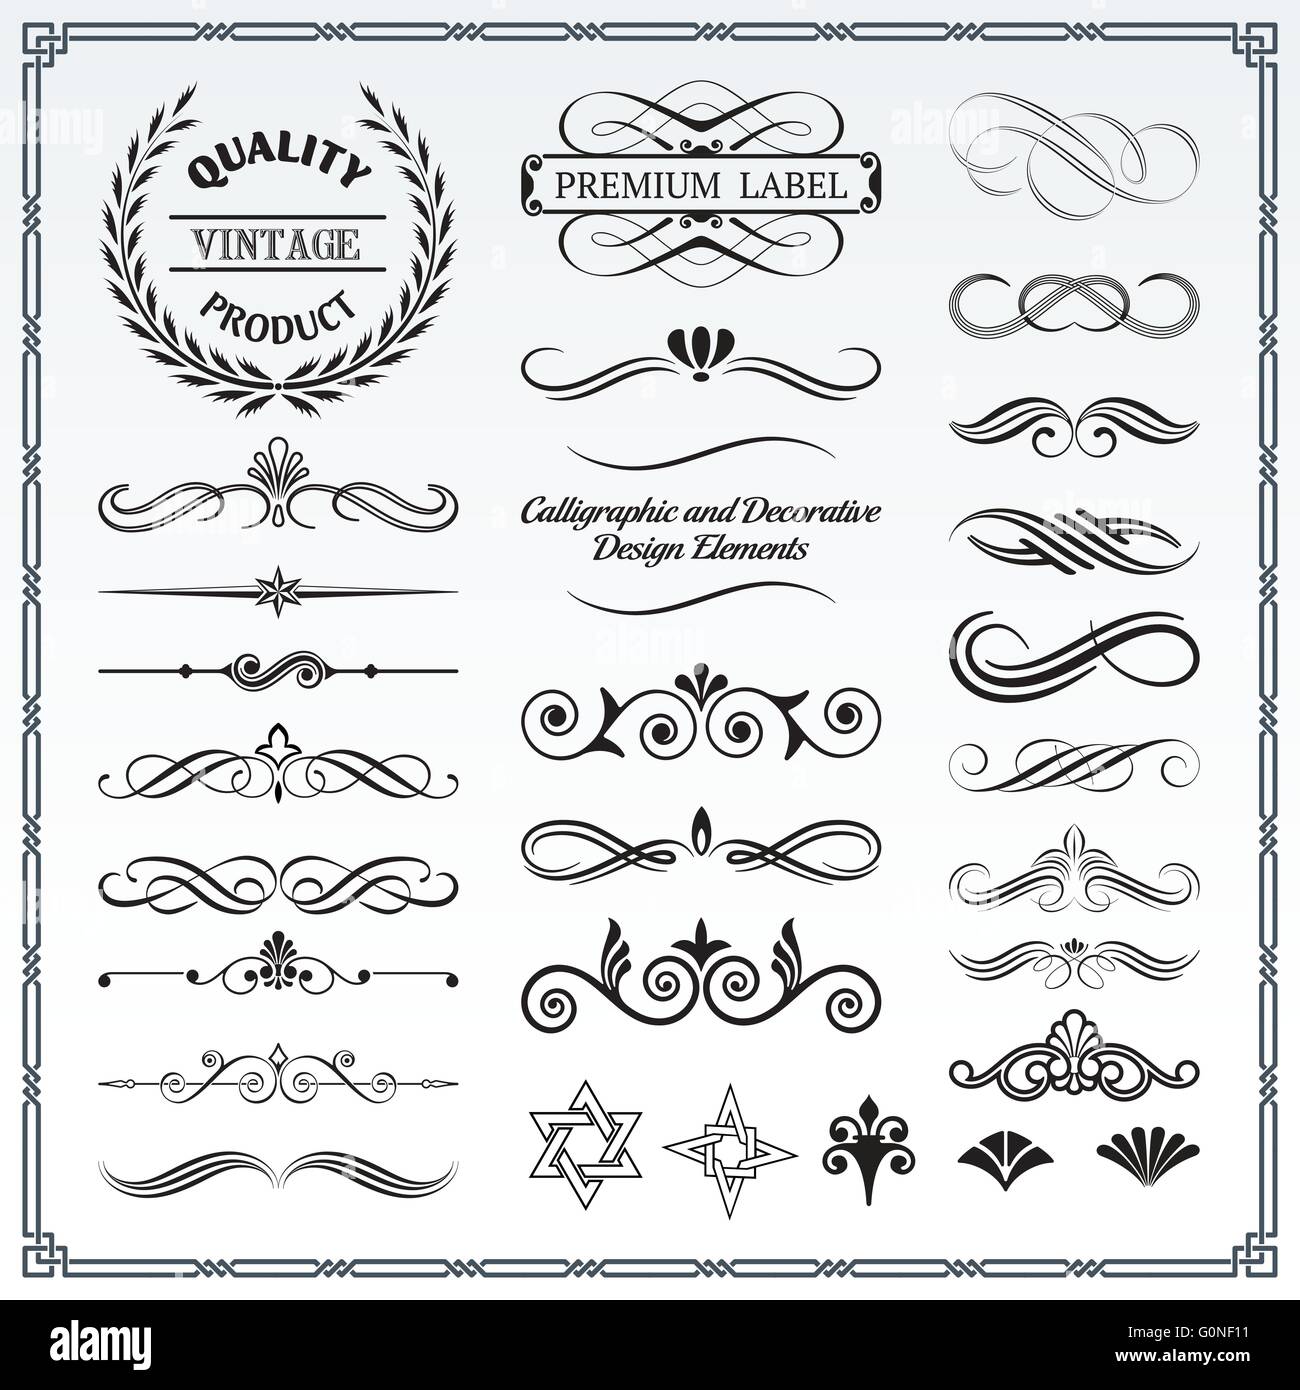 Collection of calligraphic and decorative design patterns, embellishments in vector format. Stock Vector